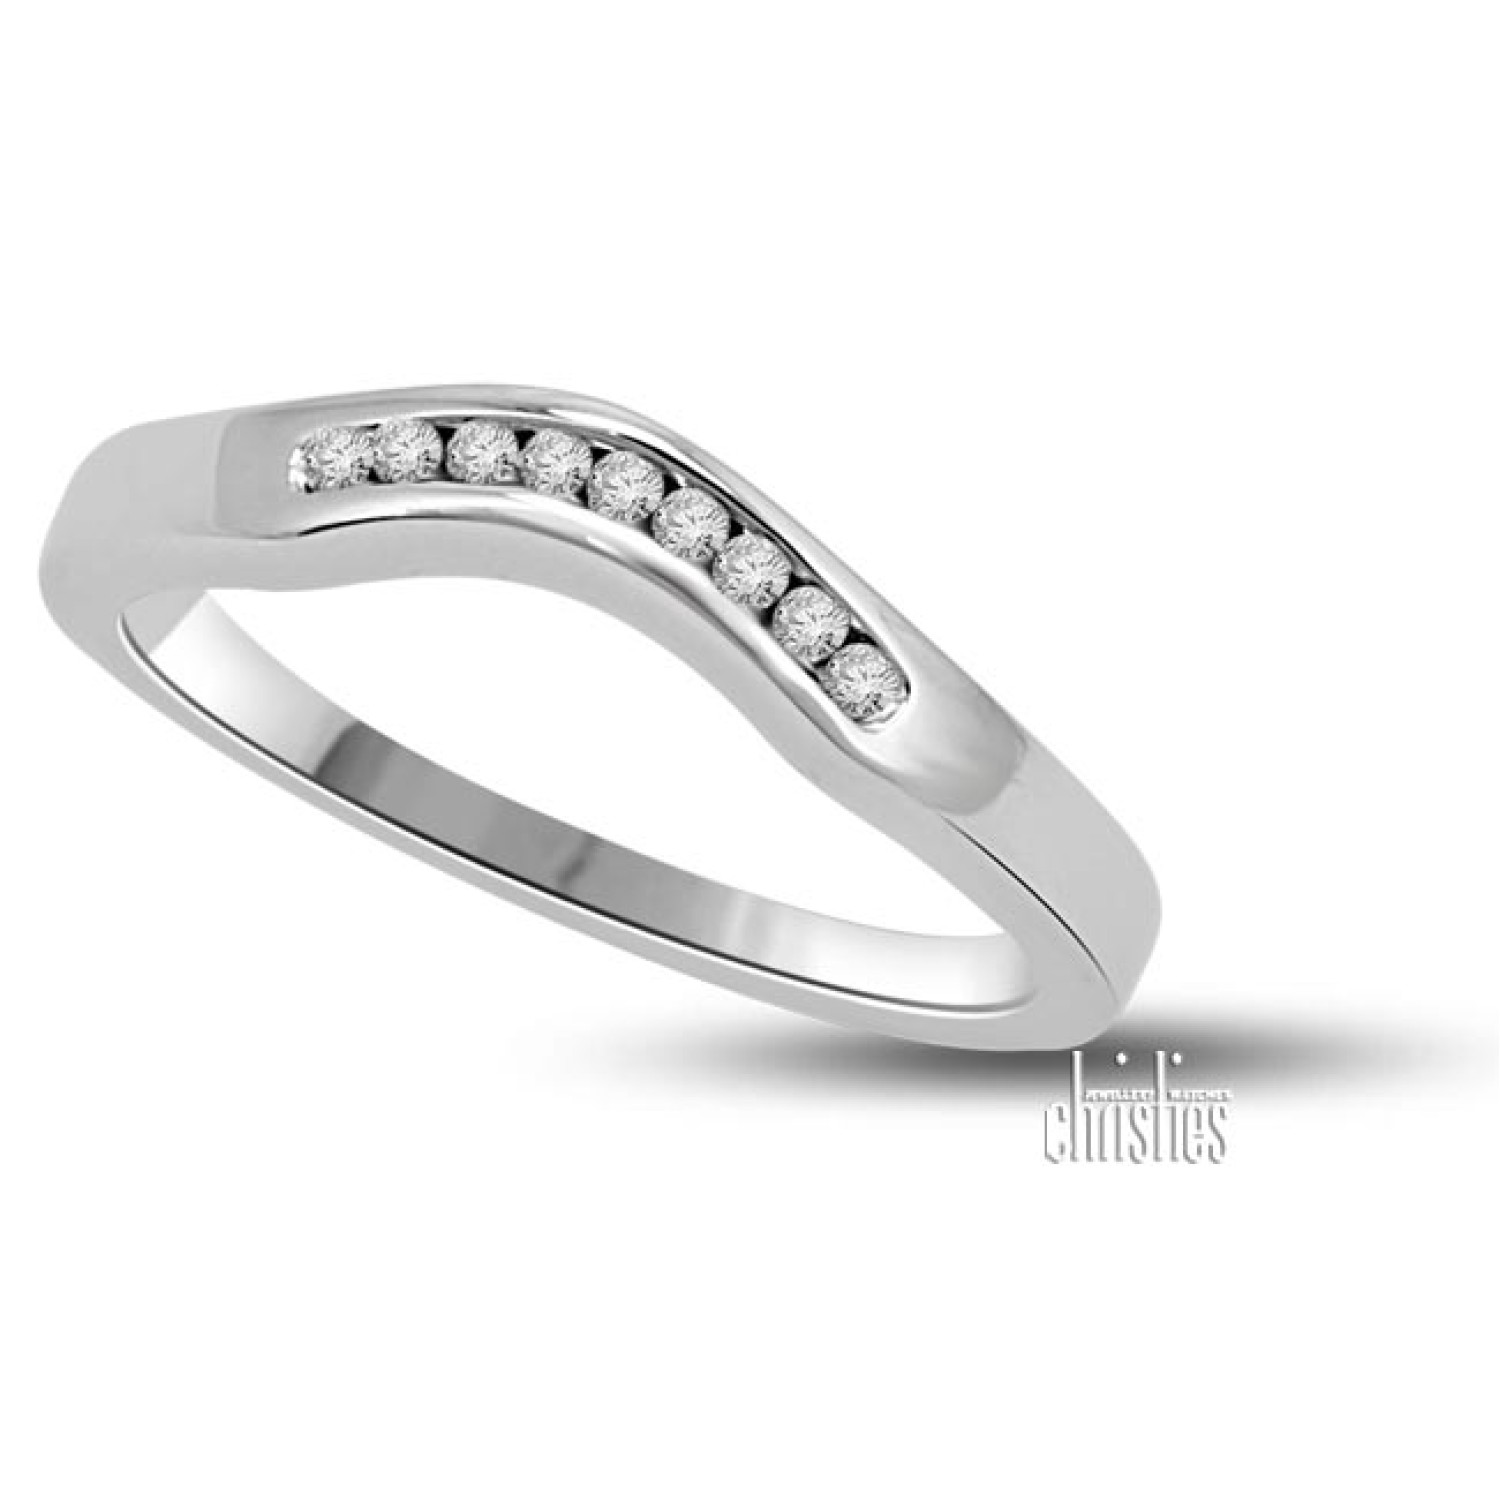 Diamond Wedding - Eternity Ring. Crafted in 9ct or 18ct White Gold see options Total diamond weight is 0.07ct Diamond colour is H/I I1 Layby and Hire purchase is available in store 3 Months No Payments and Interest for Q Card holders Supplied in a gift @c